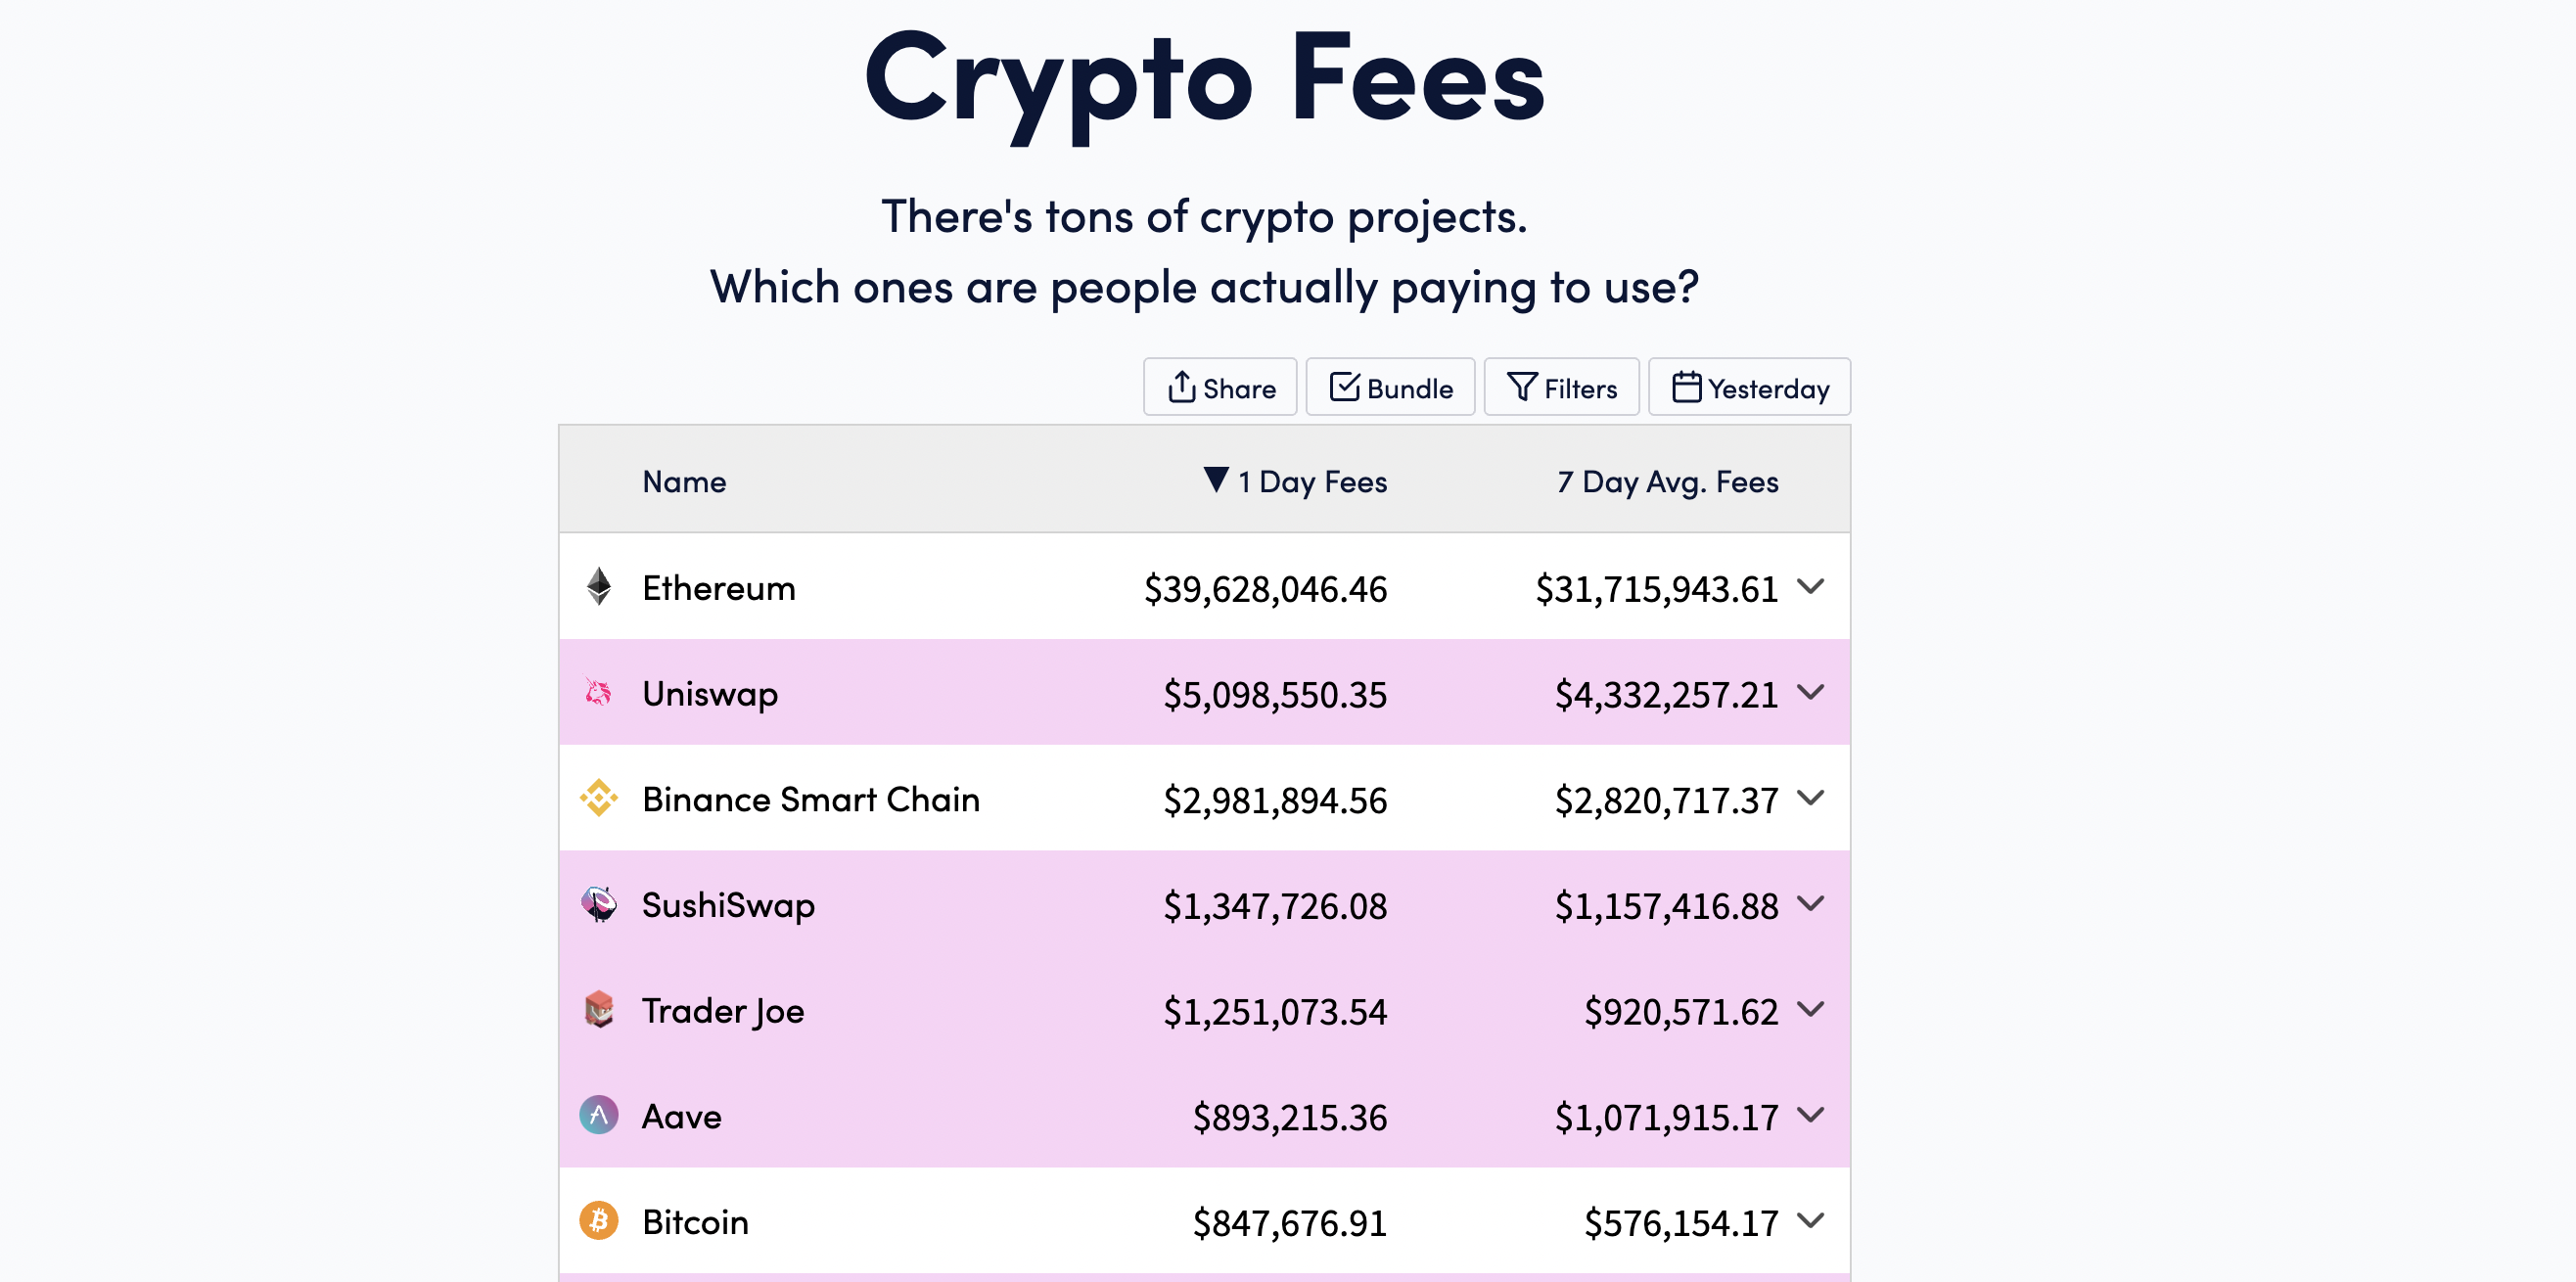 Source: cryptofees.info